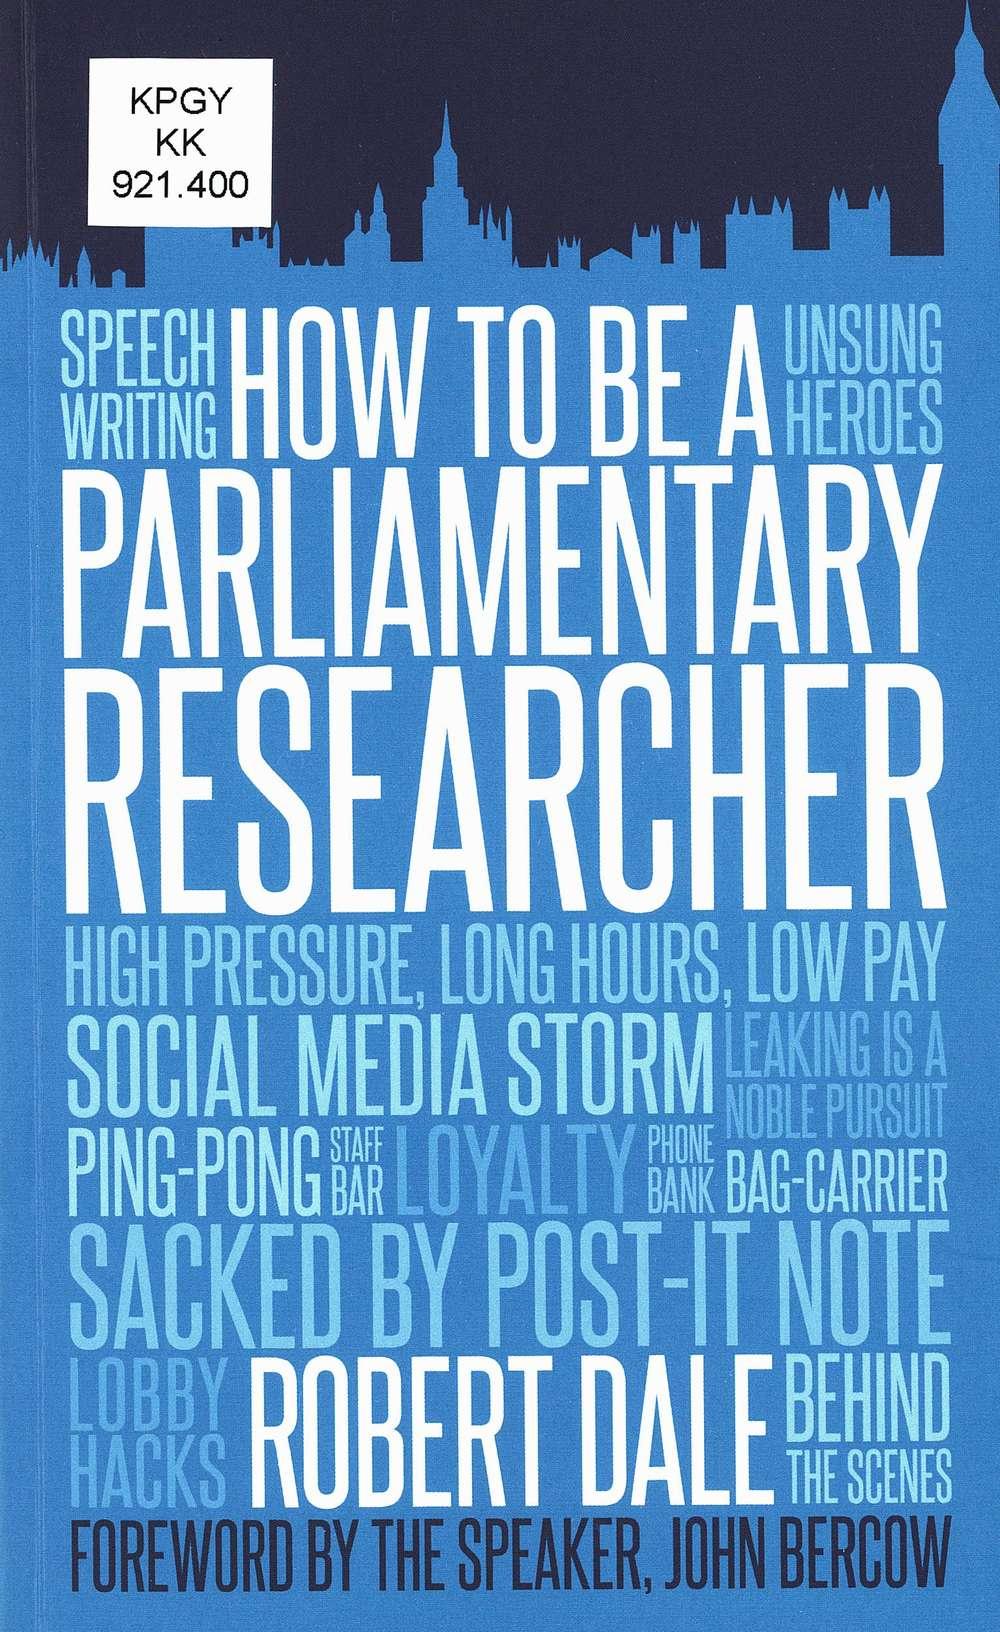 Parliamentary Researcher